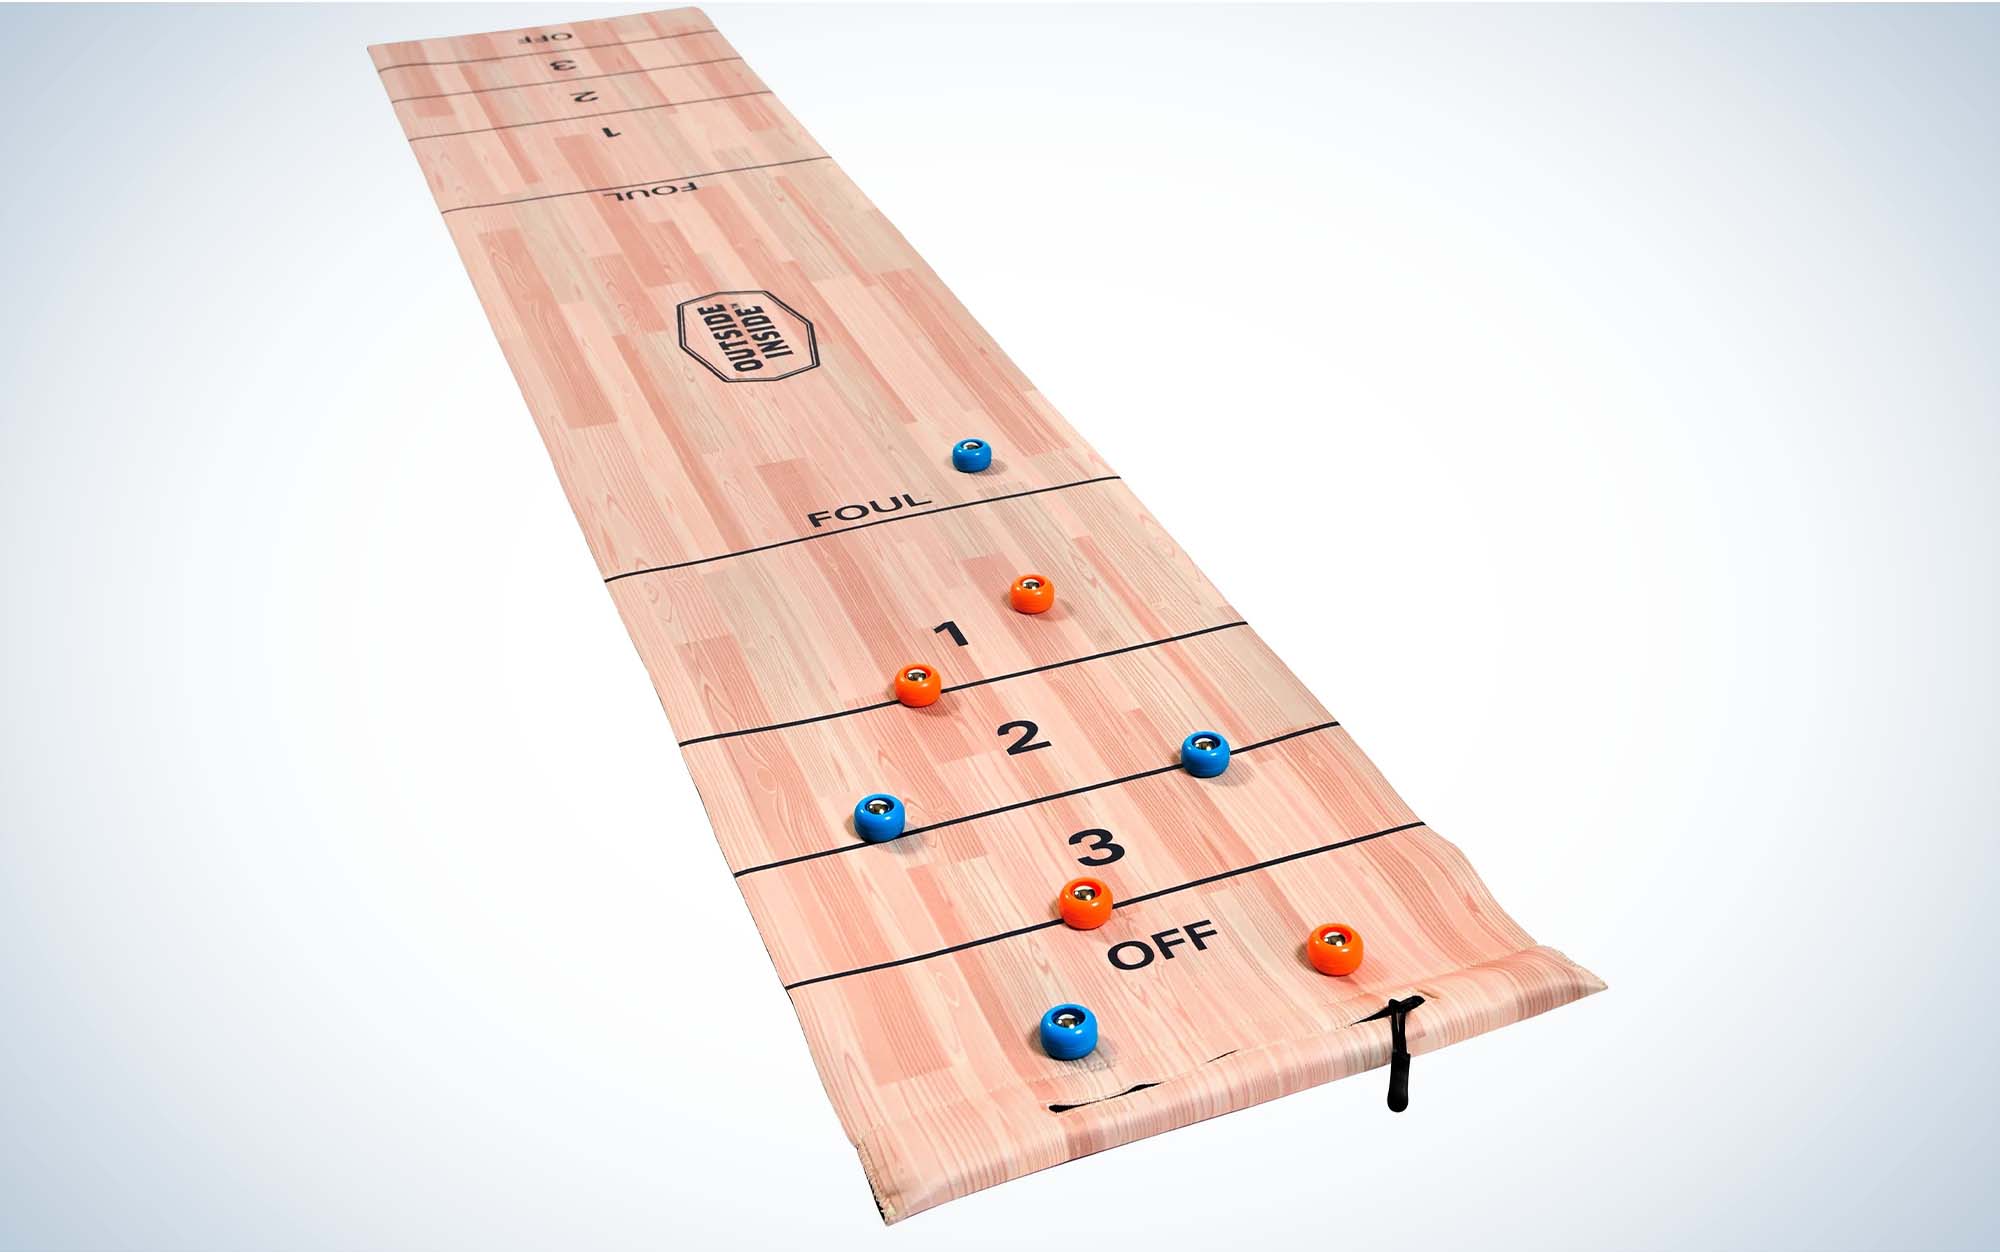 The Outside Inside Roll-up Shuffleboard is the best compact camping game.